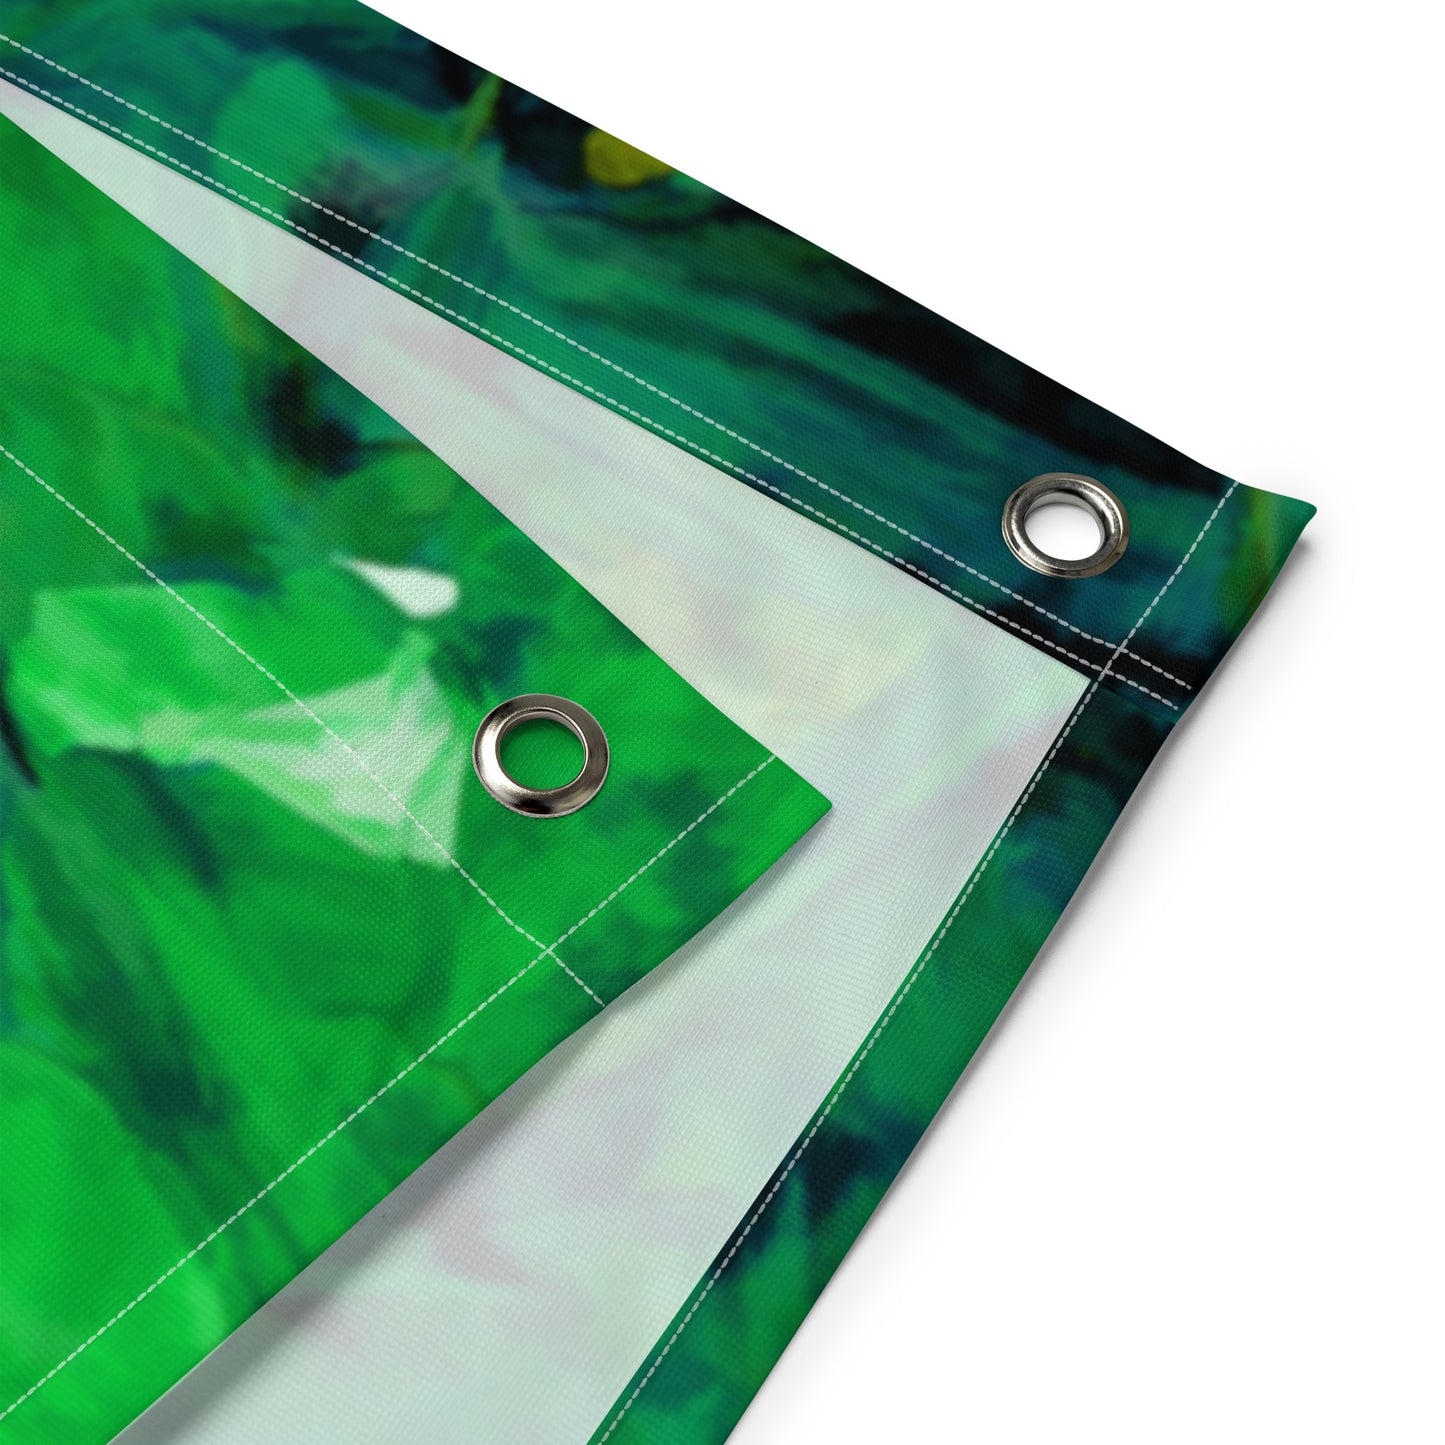 Abstract Green Painting Flag Tapestry